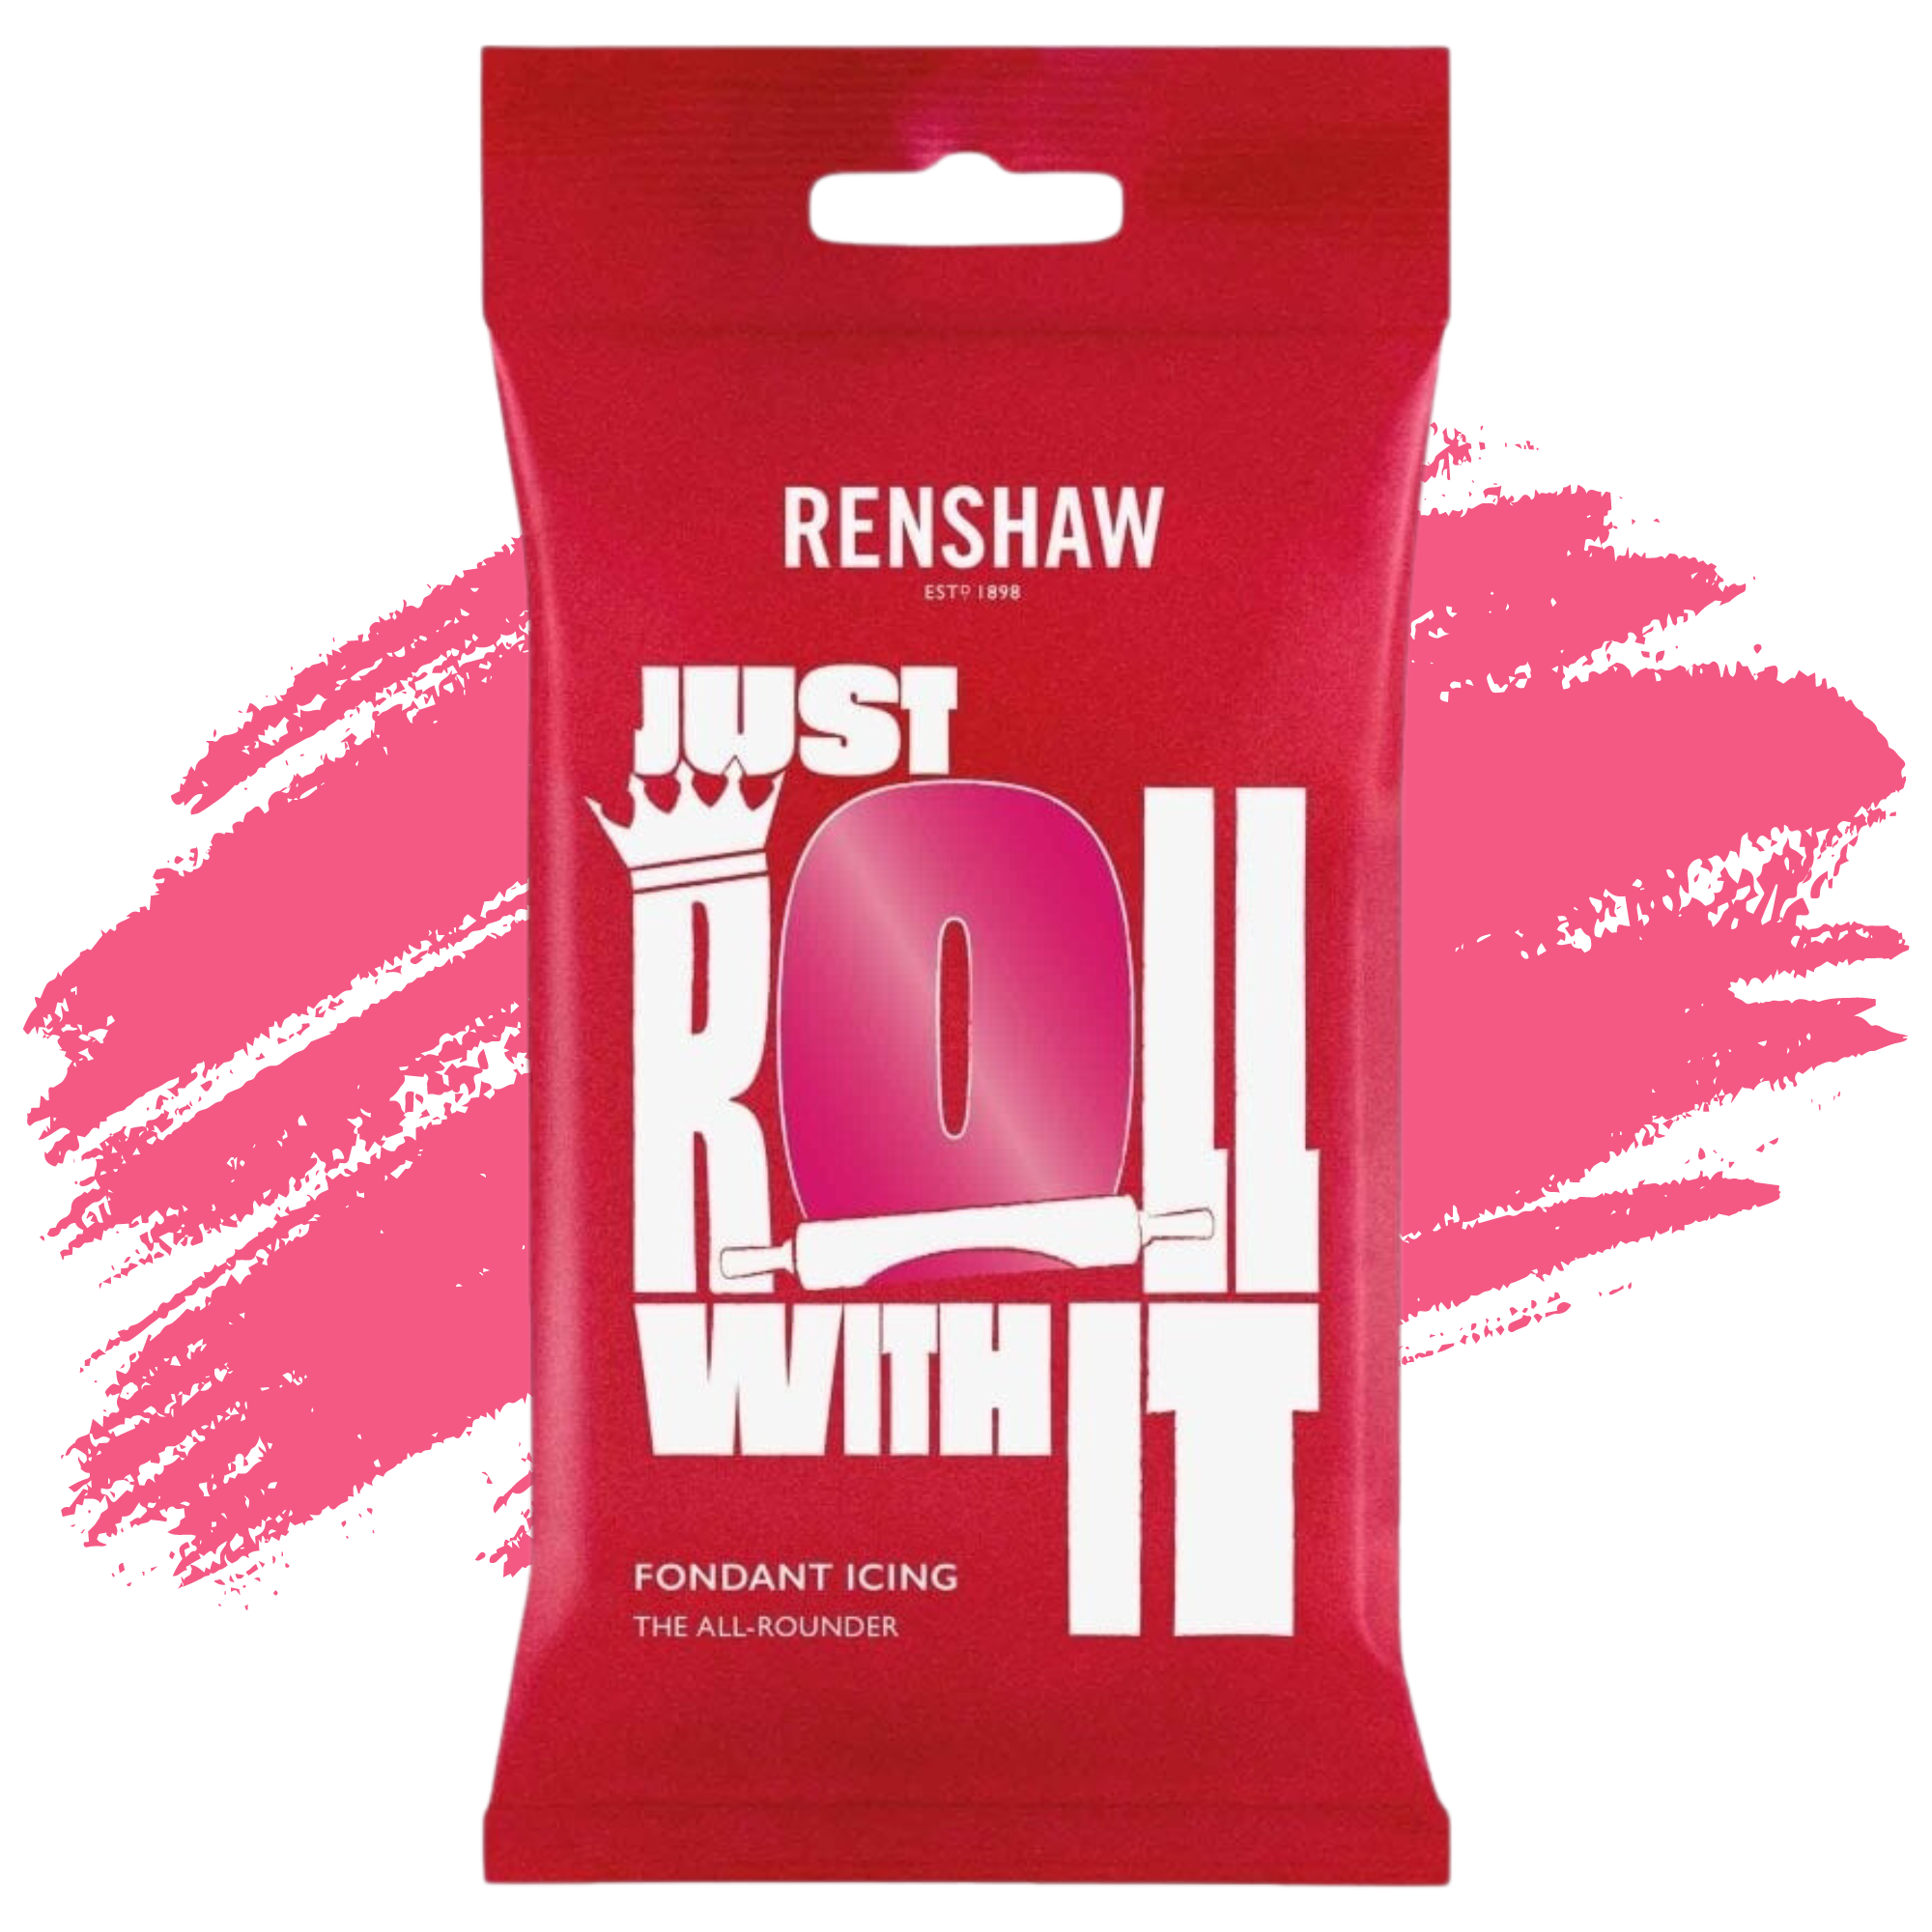 Renshaw Professional Sugar Paste Ready to Roll Fondant Just Roll with it Icing - Fuchsia / Hot Pink - 250g